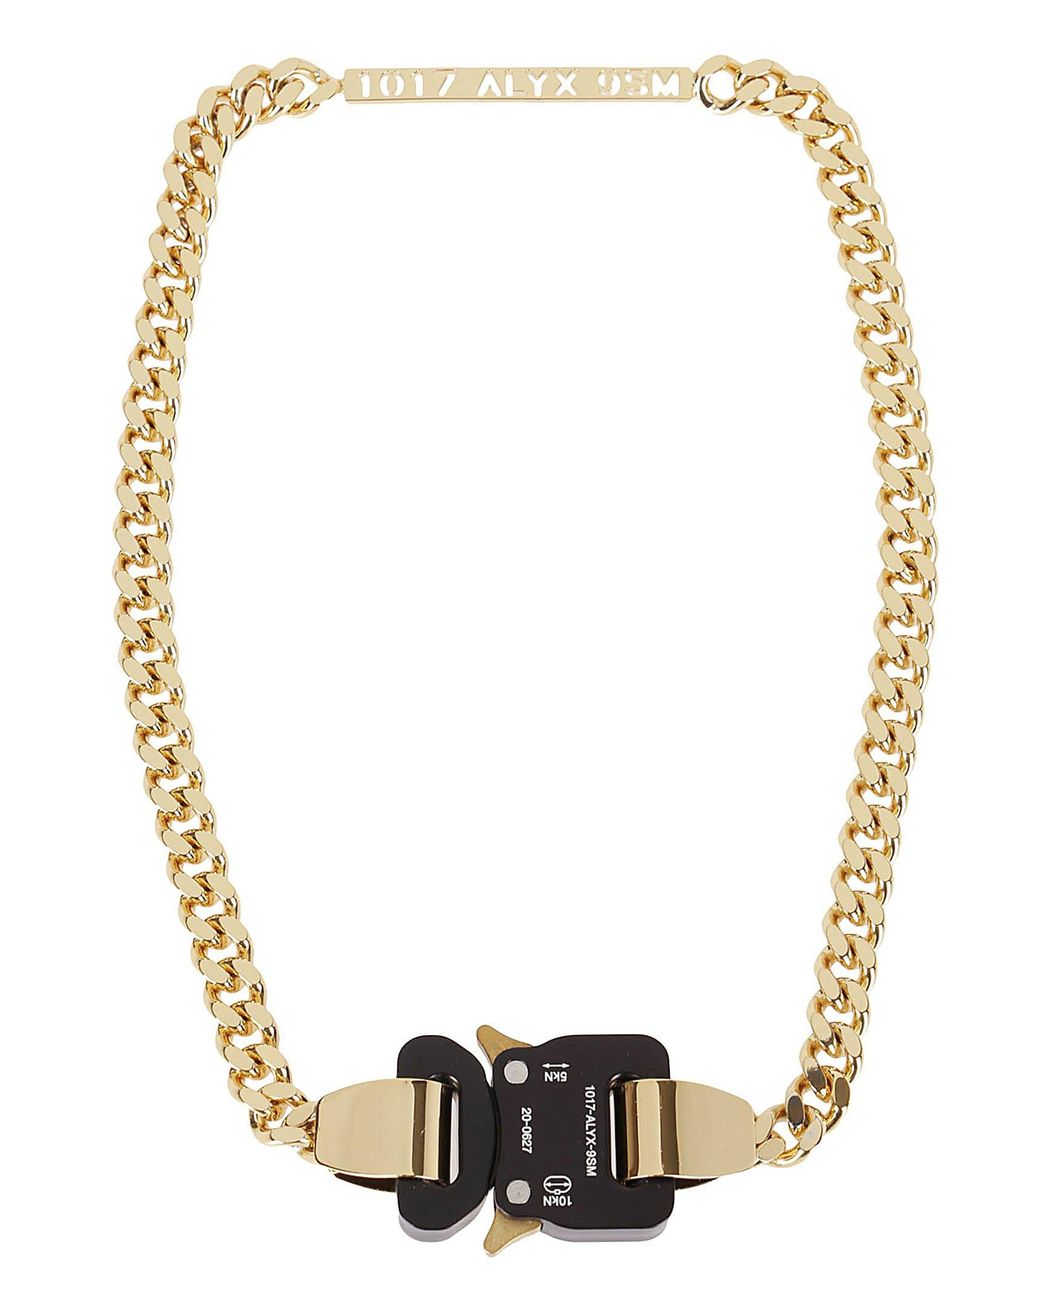 1017 ALYX 9SM 1017 Buckle Necklace in Gold (Metallic) for Men - Lyst